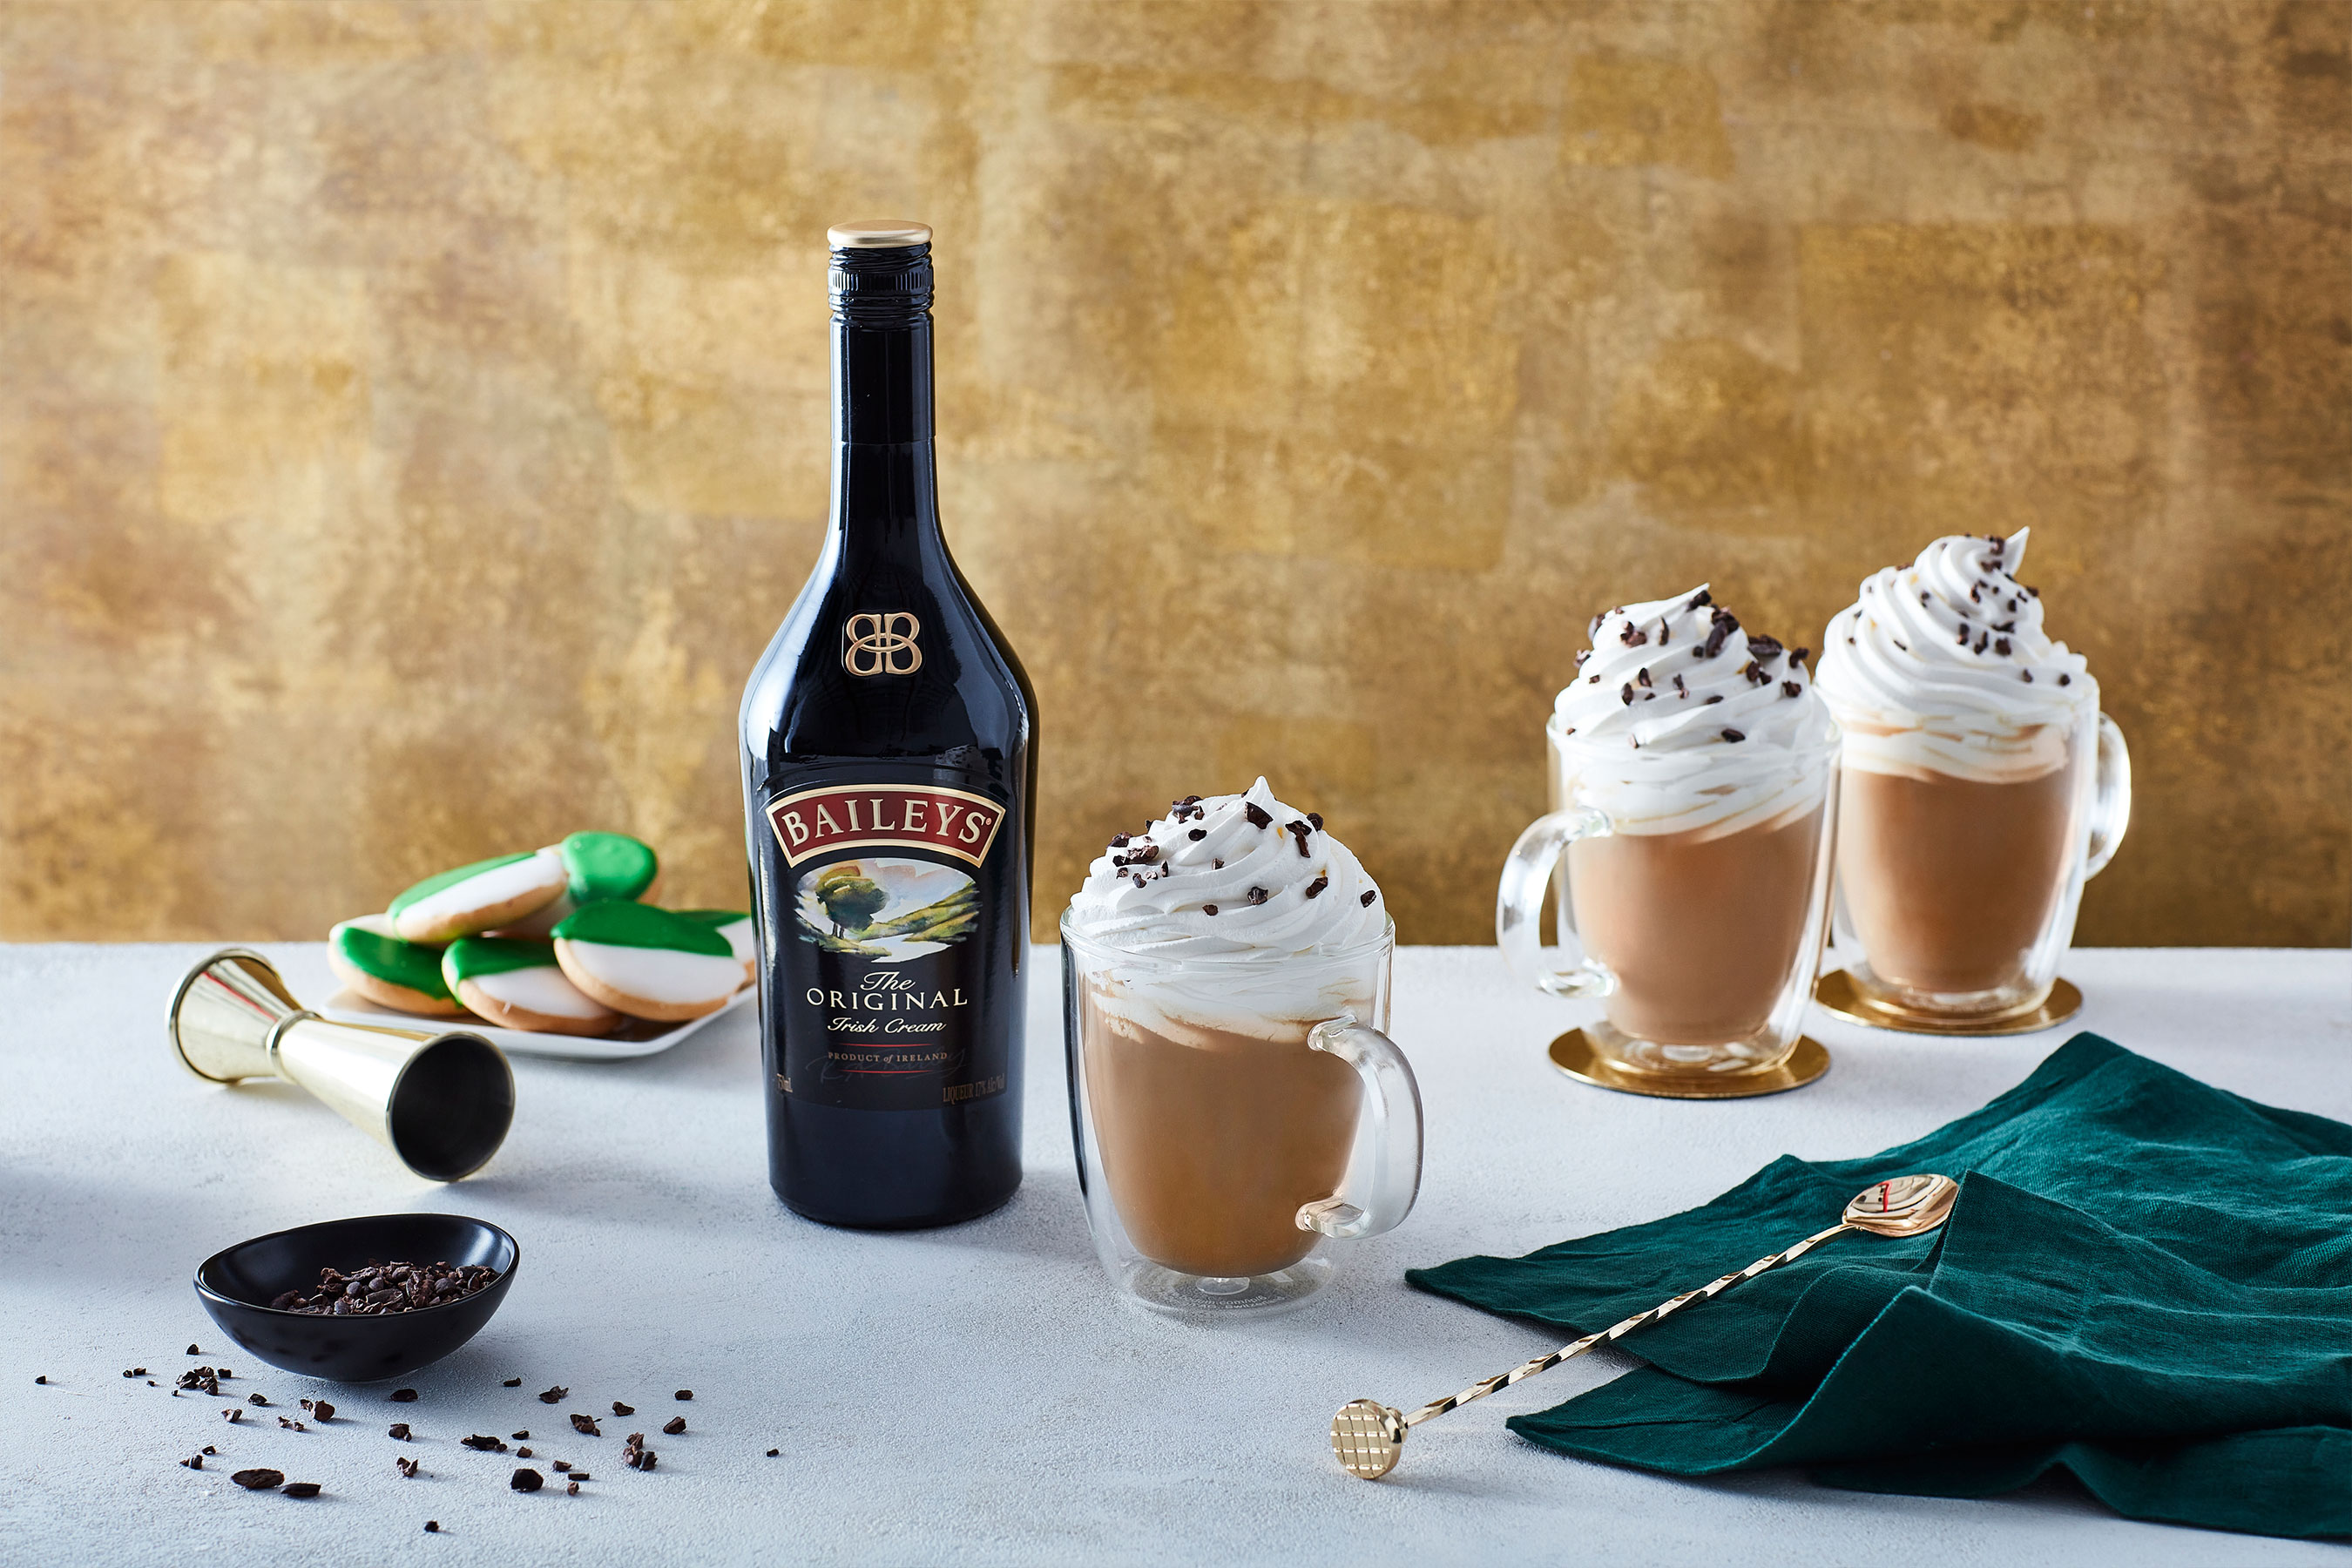 Pair our classic Baileys Irish Coffee with your brunch spread for adult drinkers 21+!